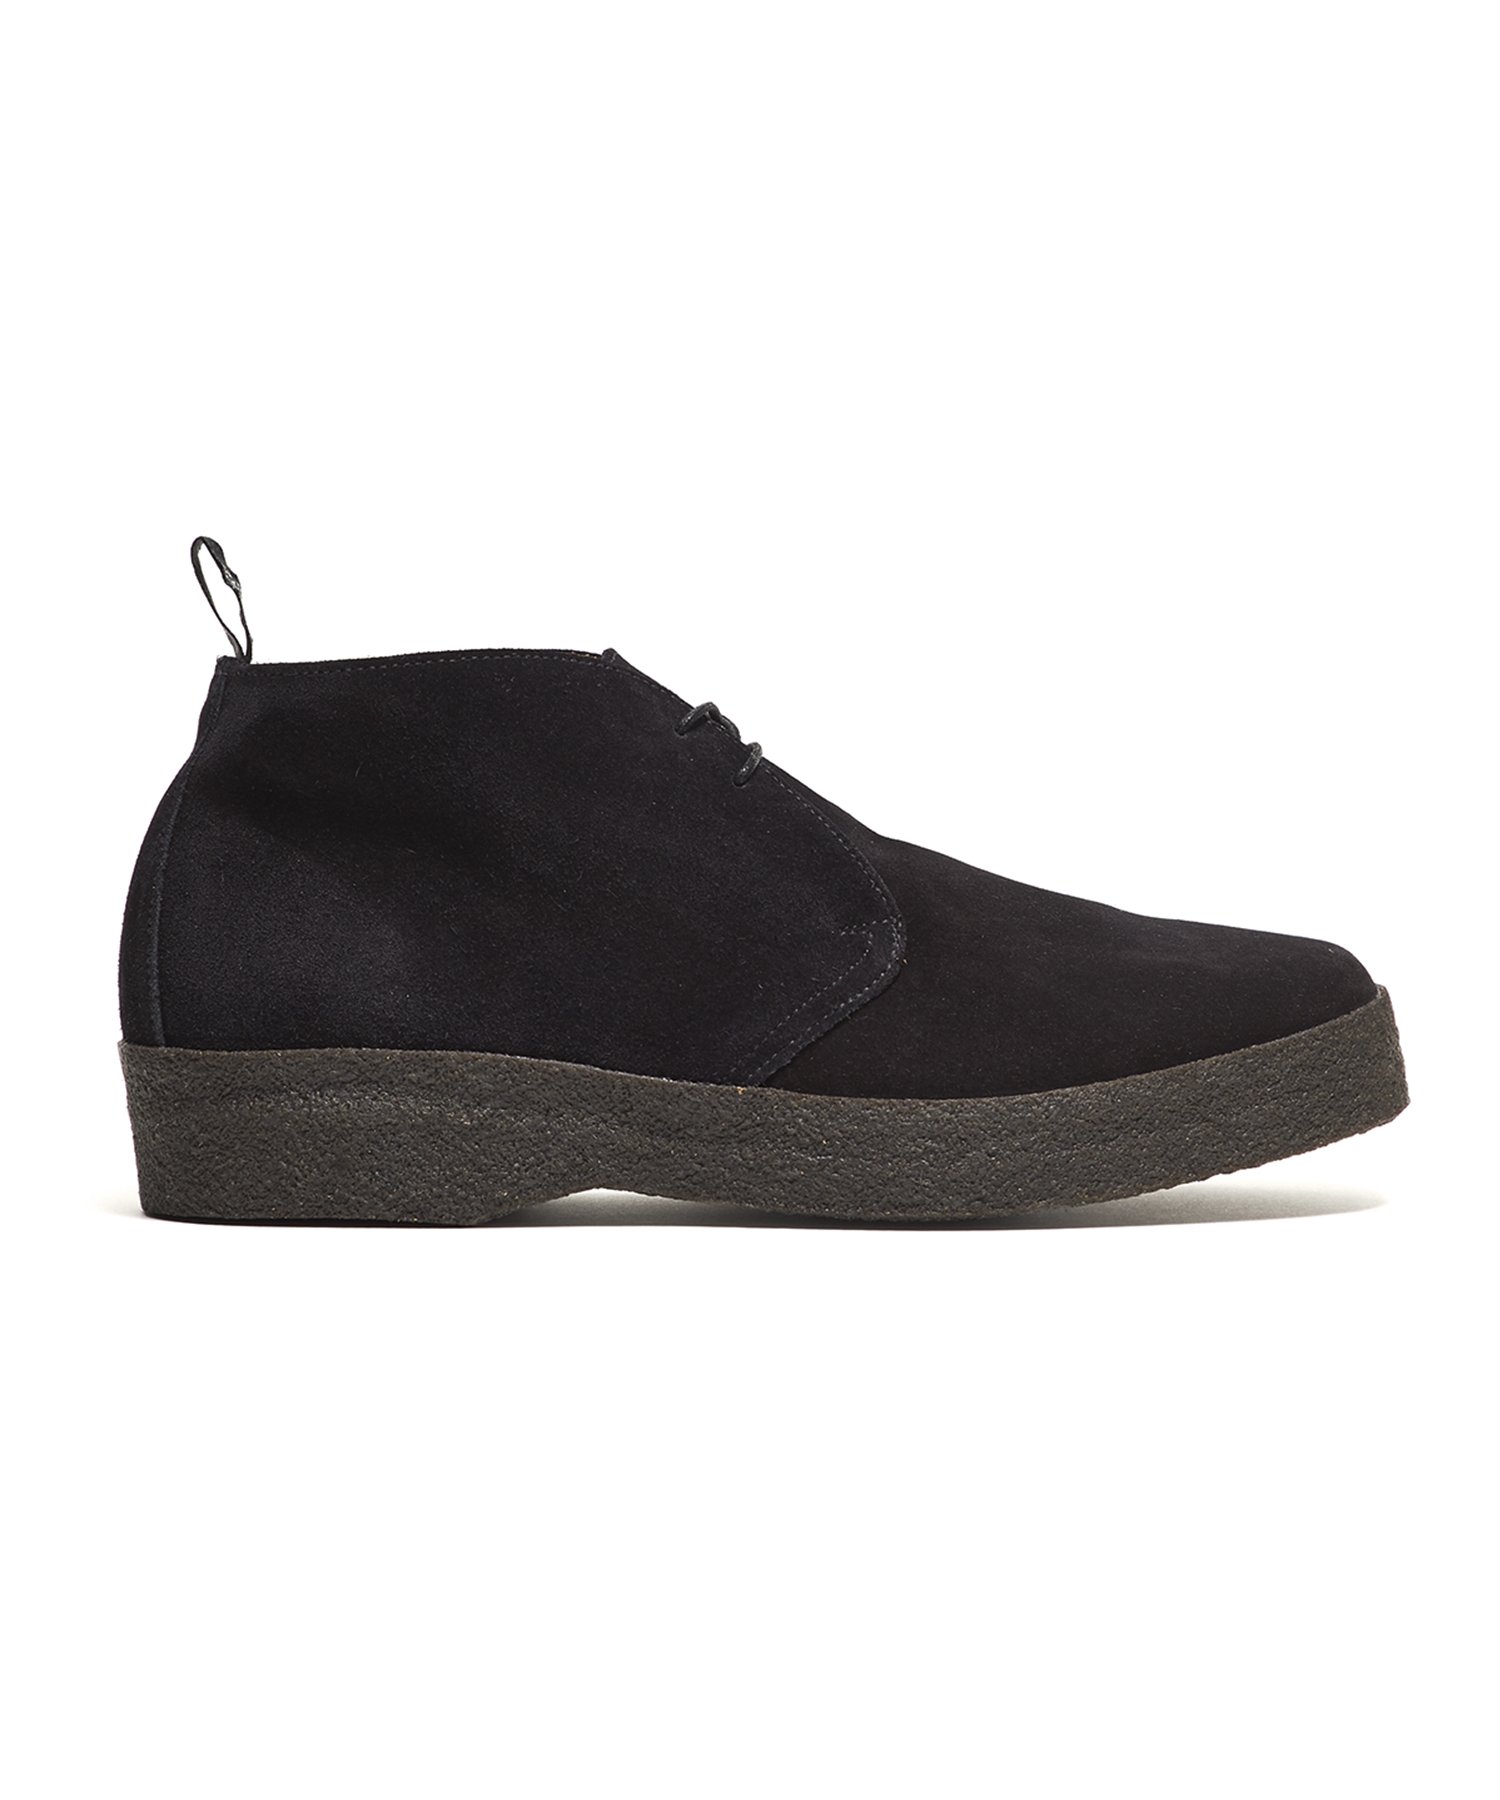 Sanders Suede Chukka Boot in Black | The Fashionisto